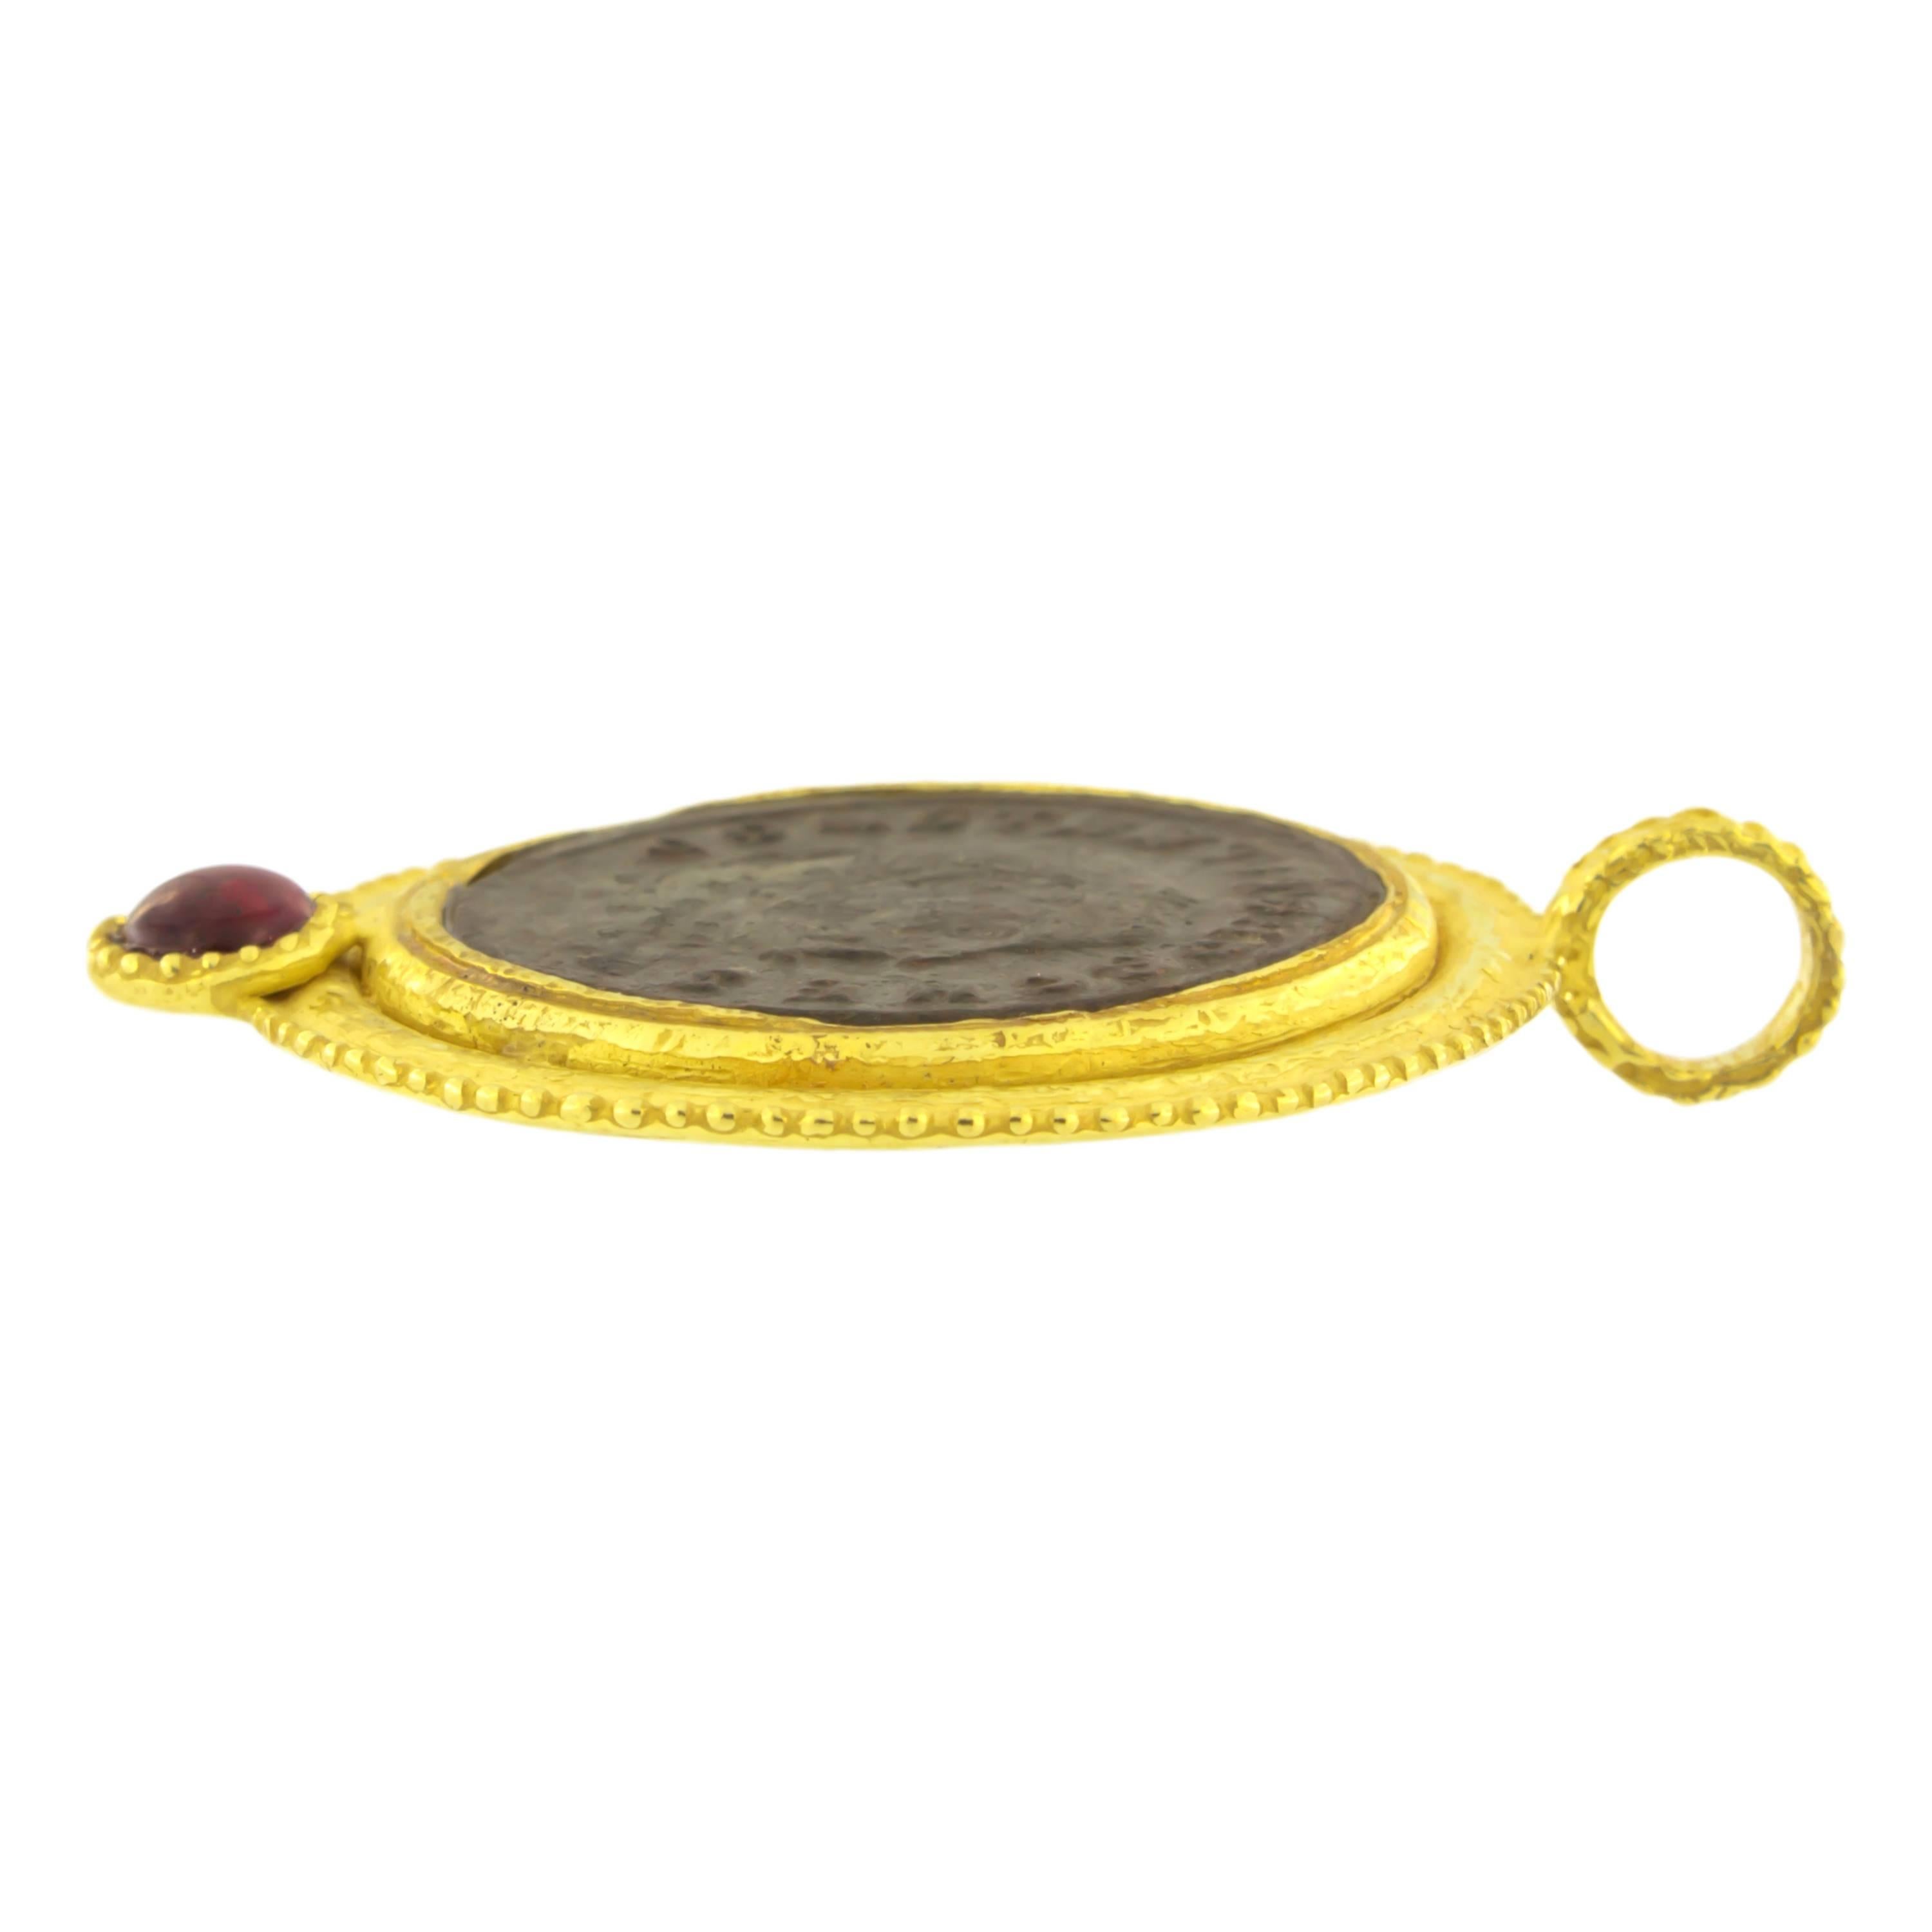 Ancient Roman Coin and Tourmaline Satin Yellow Gold Pendant, from Sacchi’s Roma Collection, hand-crafted with lost-wax casting technique.

Lost-wax casting, one of the oldest techniques for creating Jewelry, forms the basis of Sacchi's Jewelry